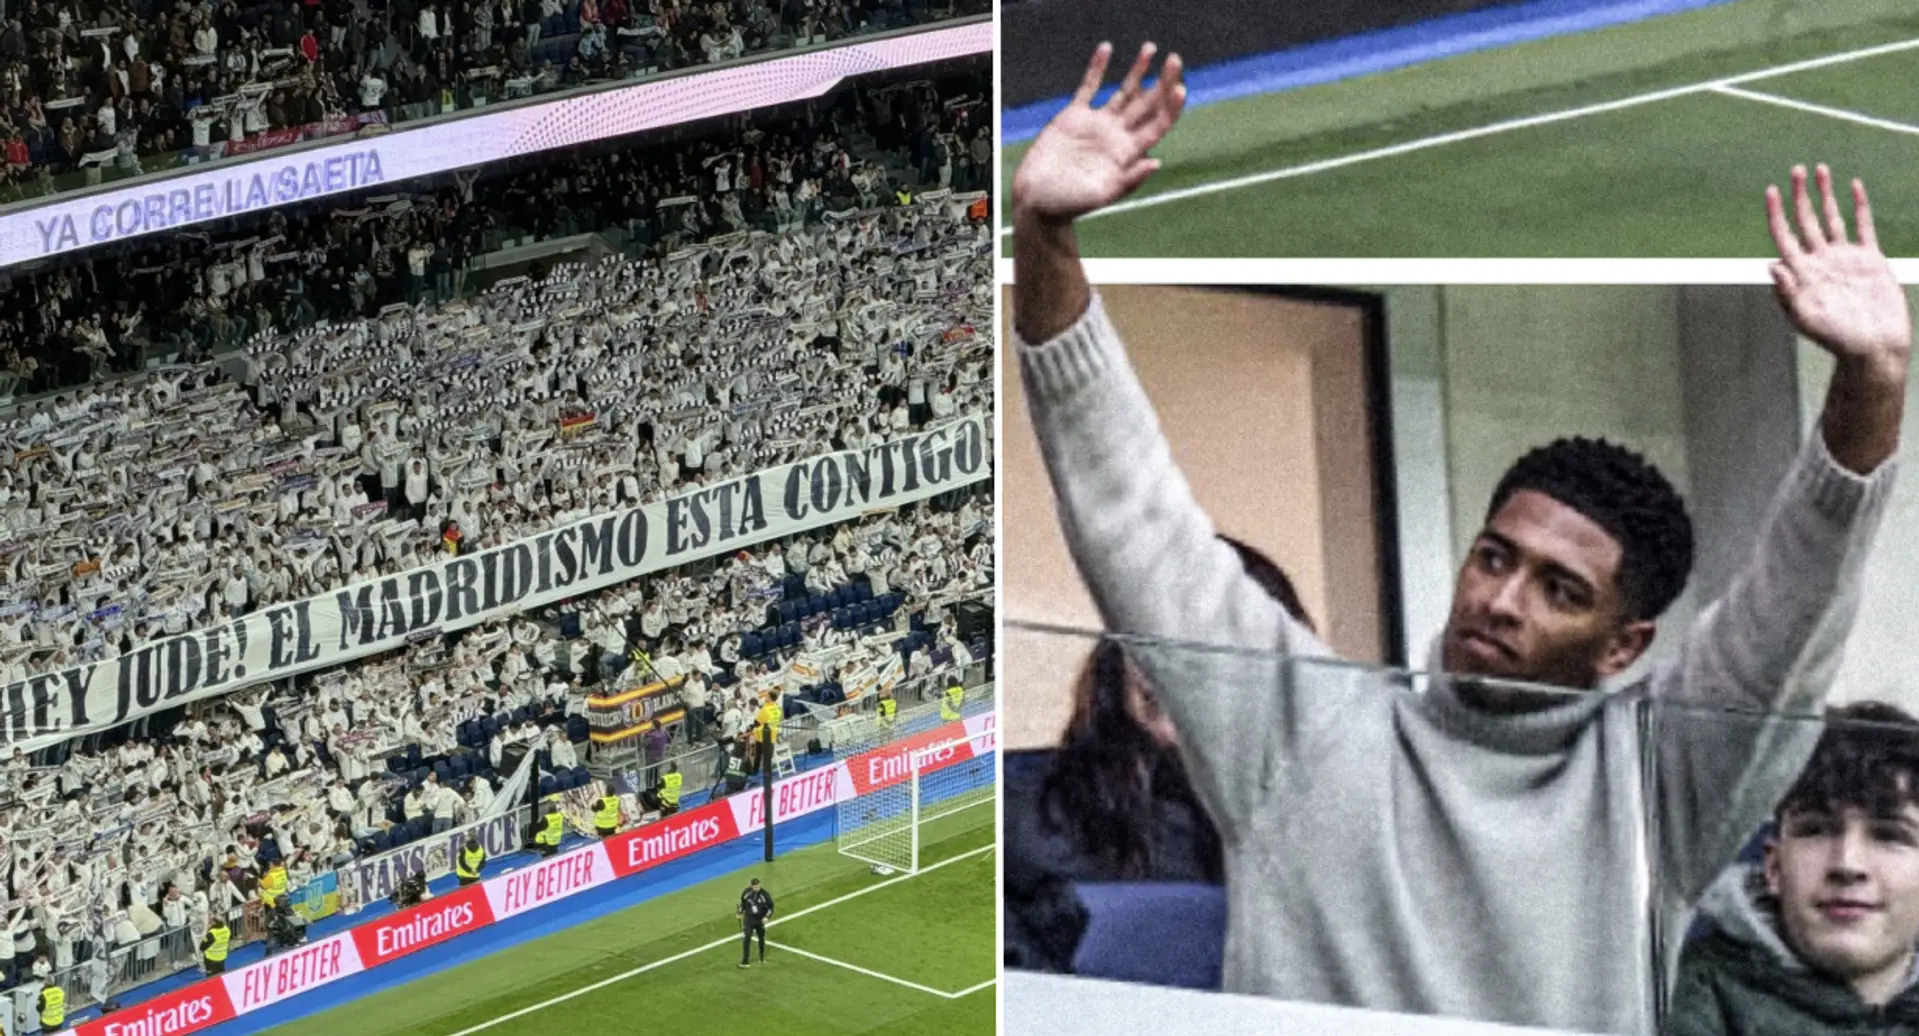 "My club": Jude Bellingham reacts to special message madridistas left for him at Bernabeu